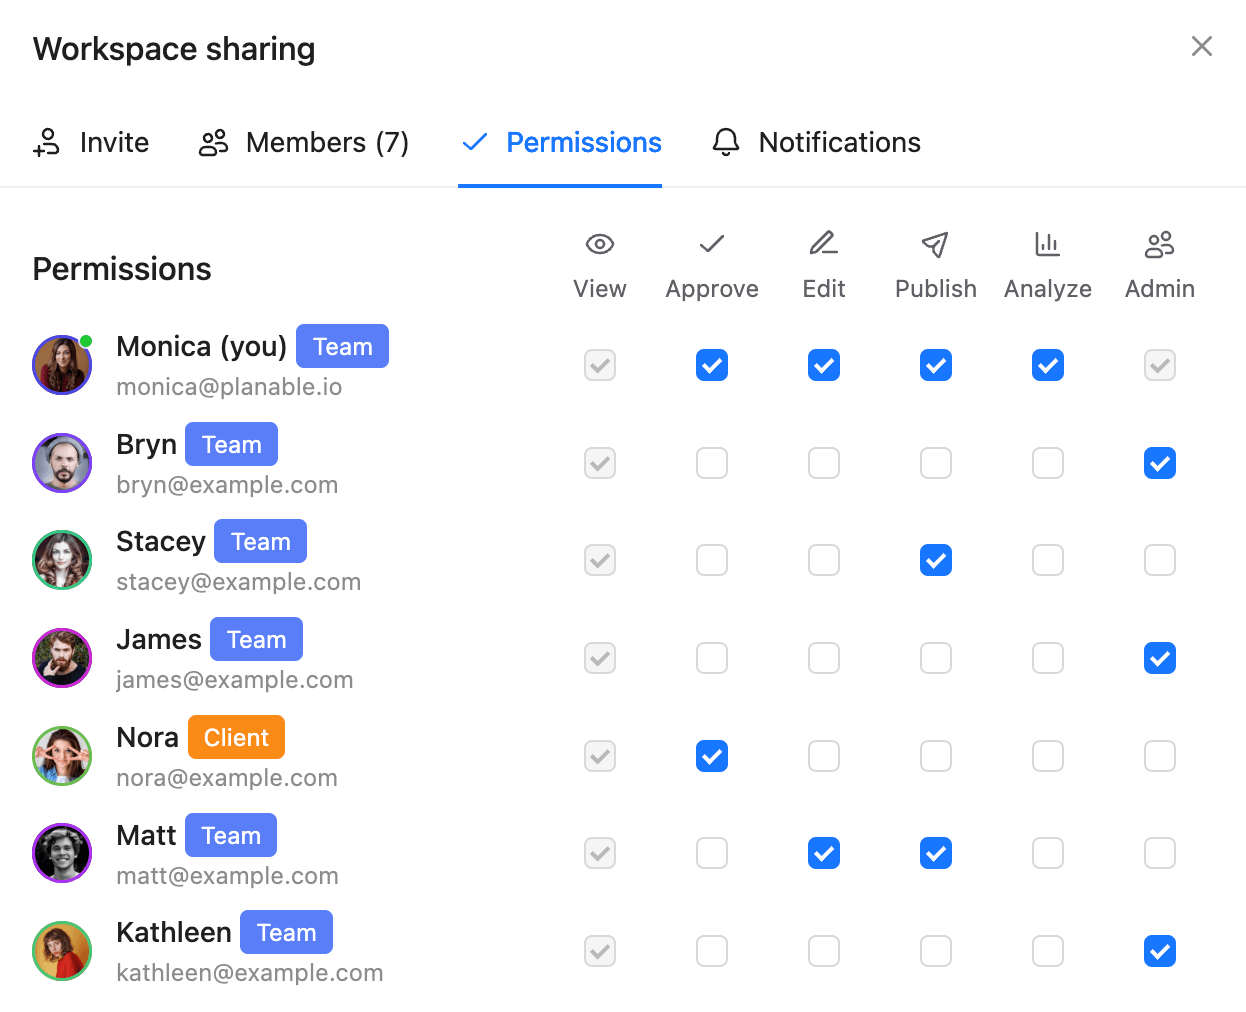 Workspace sharing permissions interface showing team members with varying levels of access, including view, approve, edit, publish, analyze, and admin.